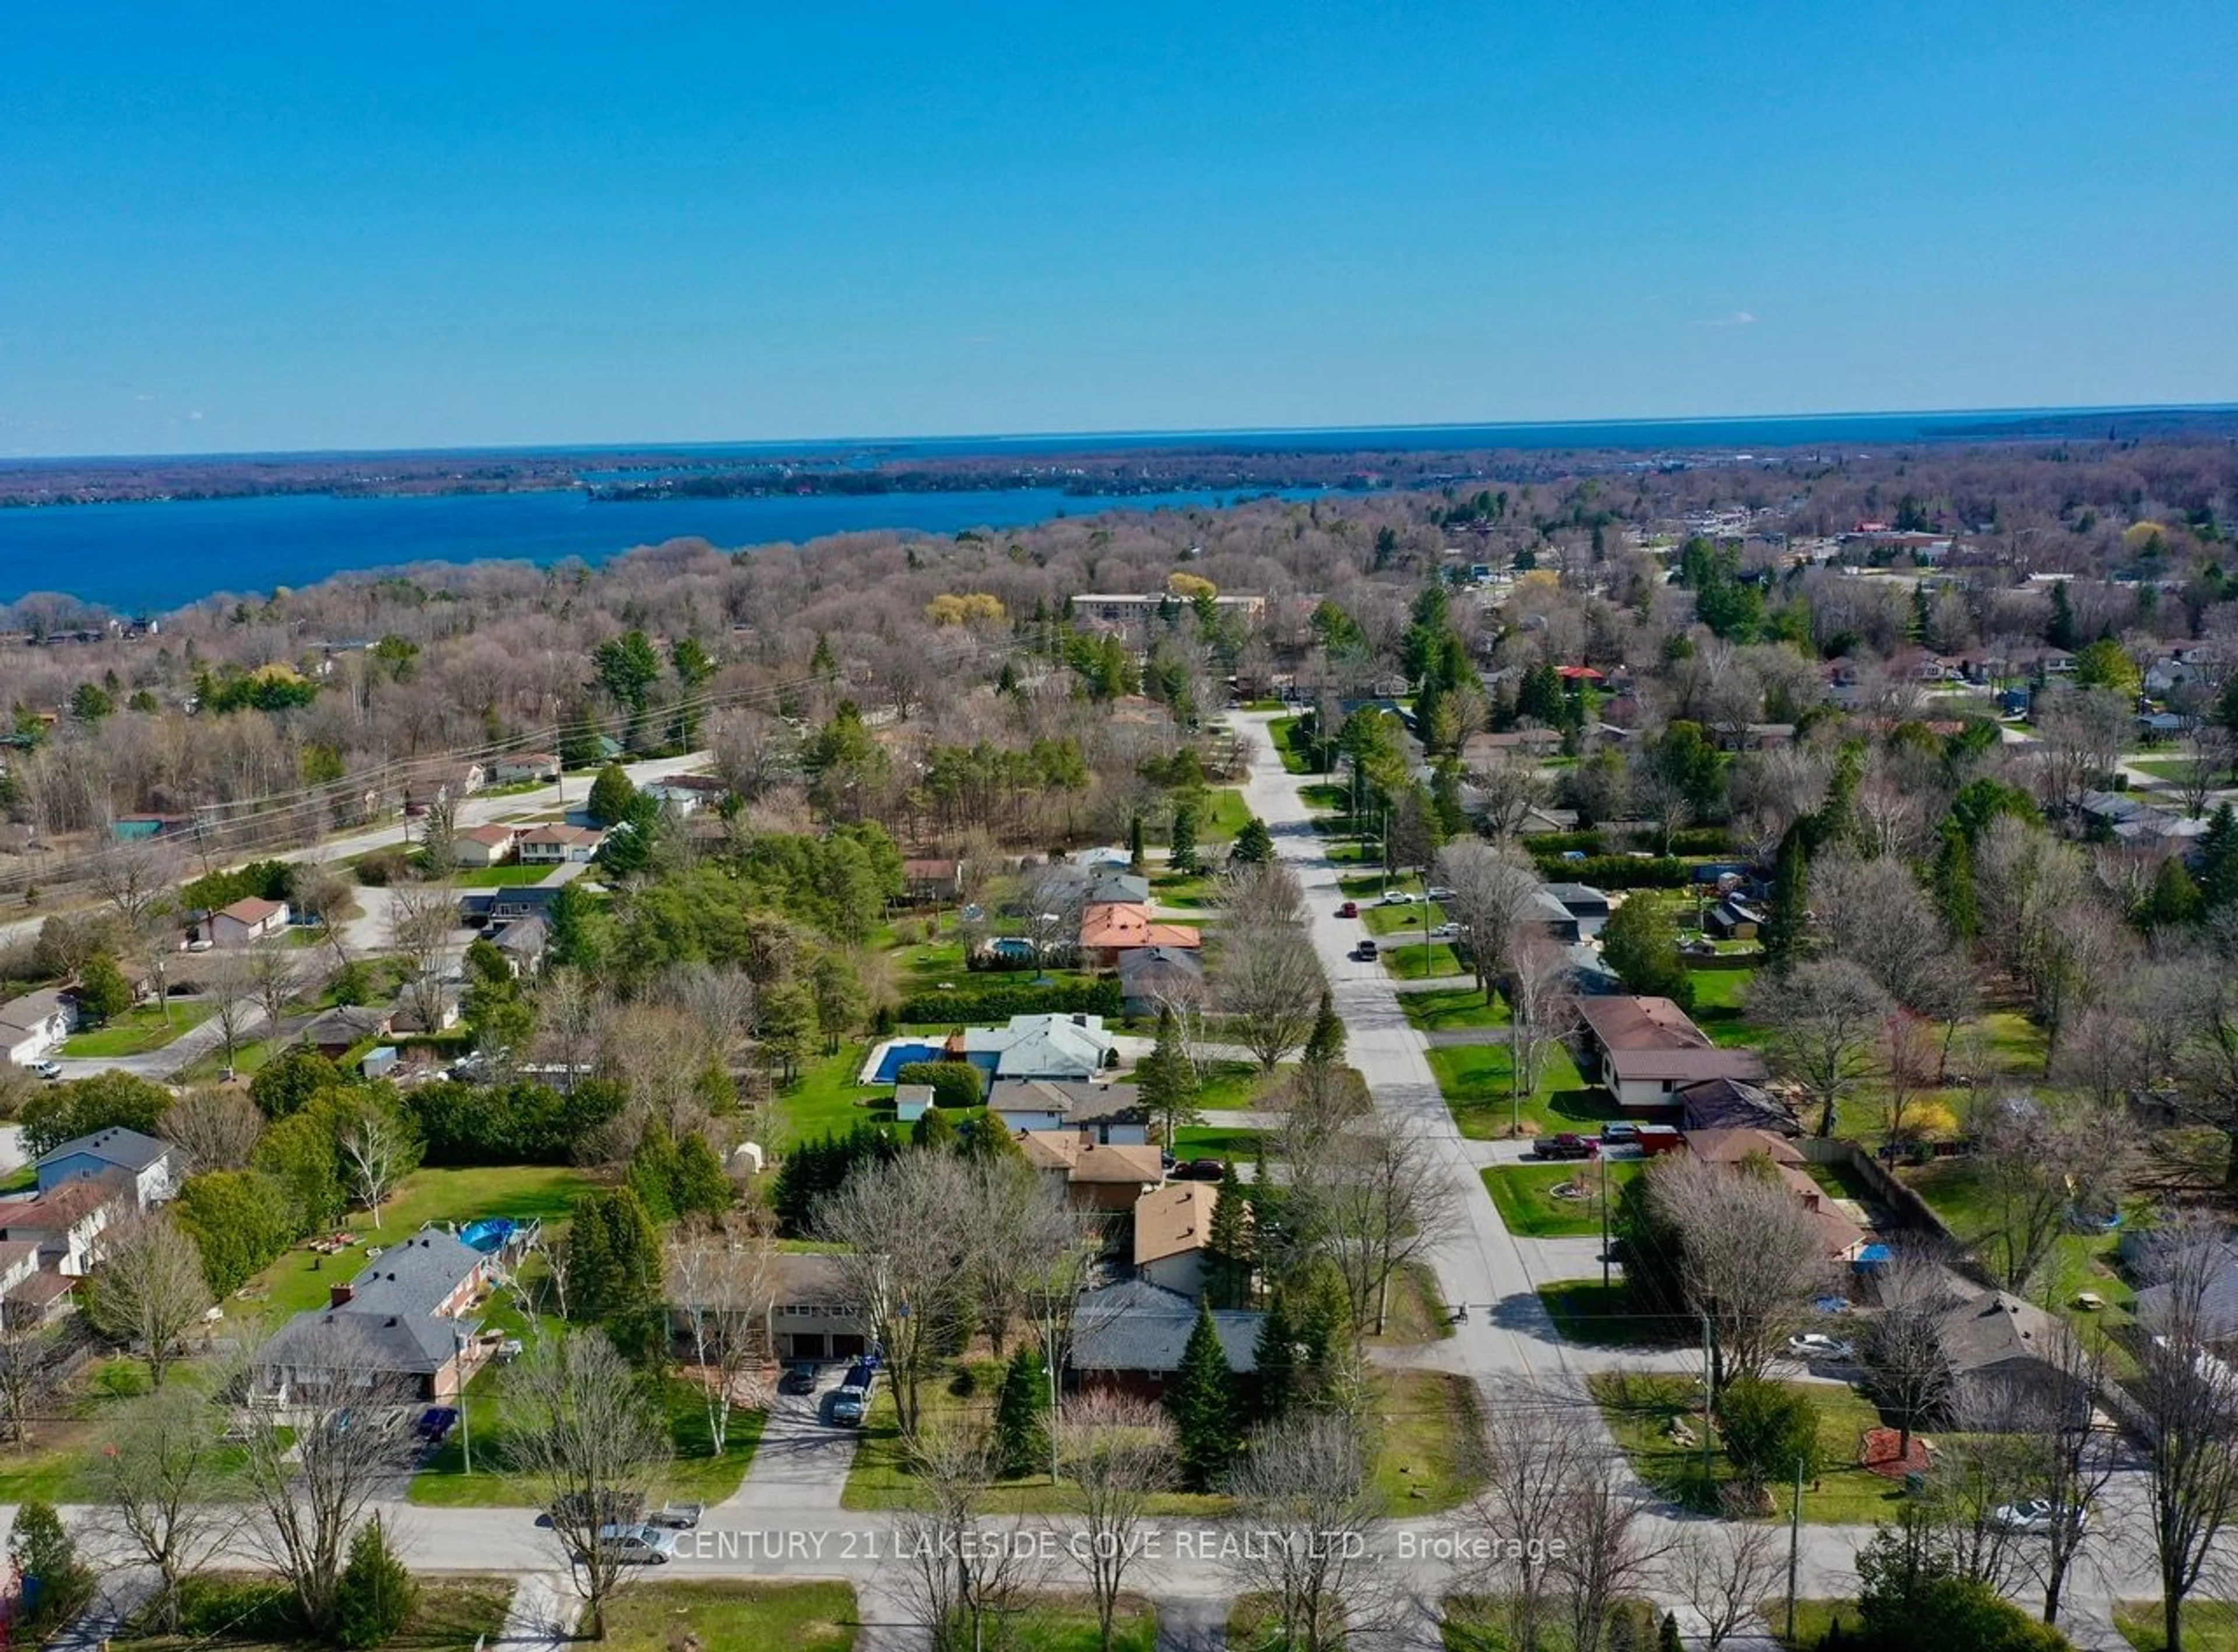 Lakeview for 66 Second St, Orillia Ontario L3V 4B4